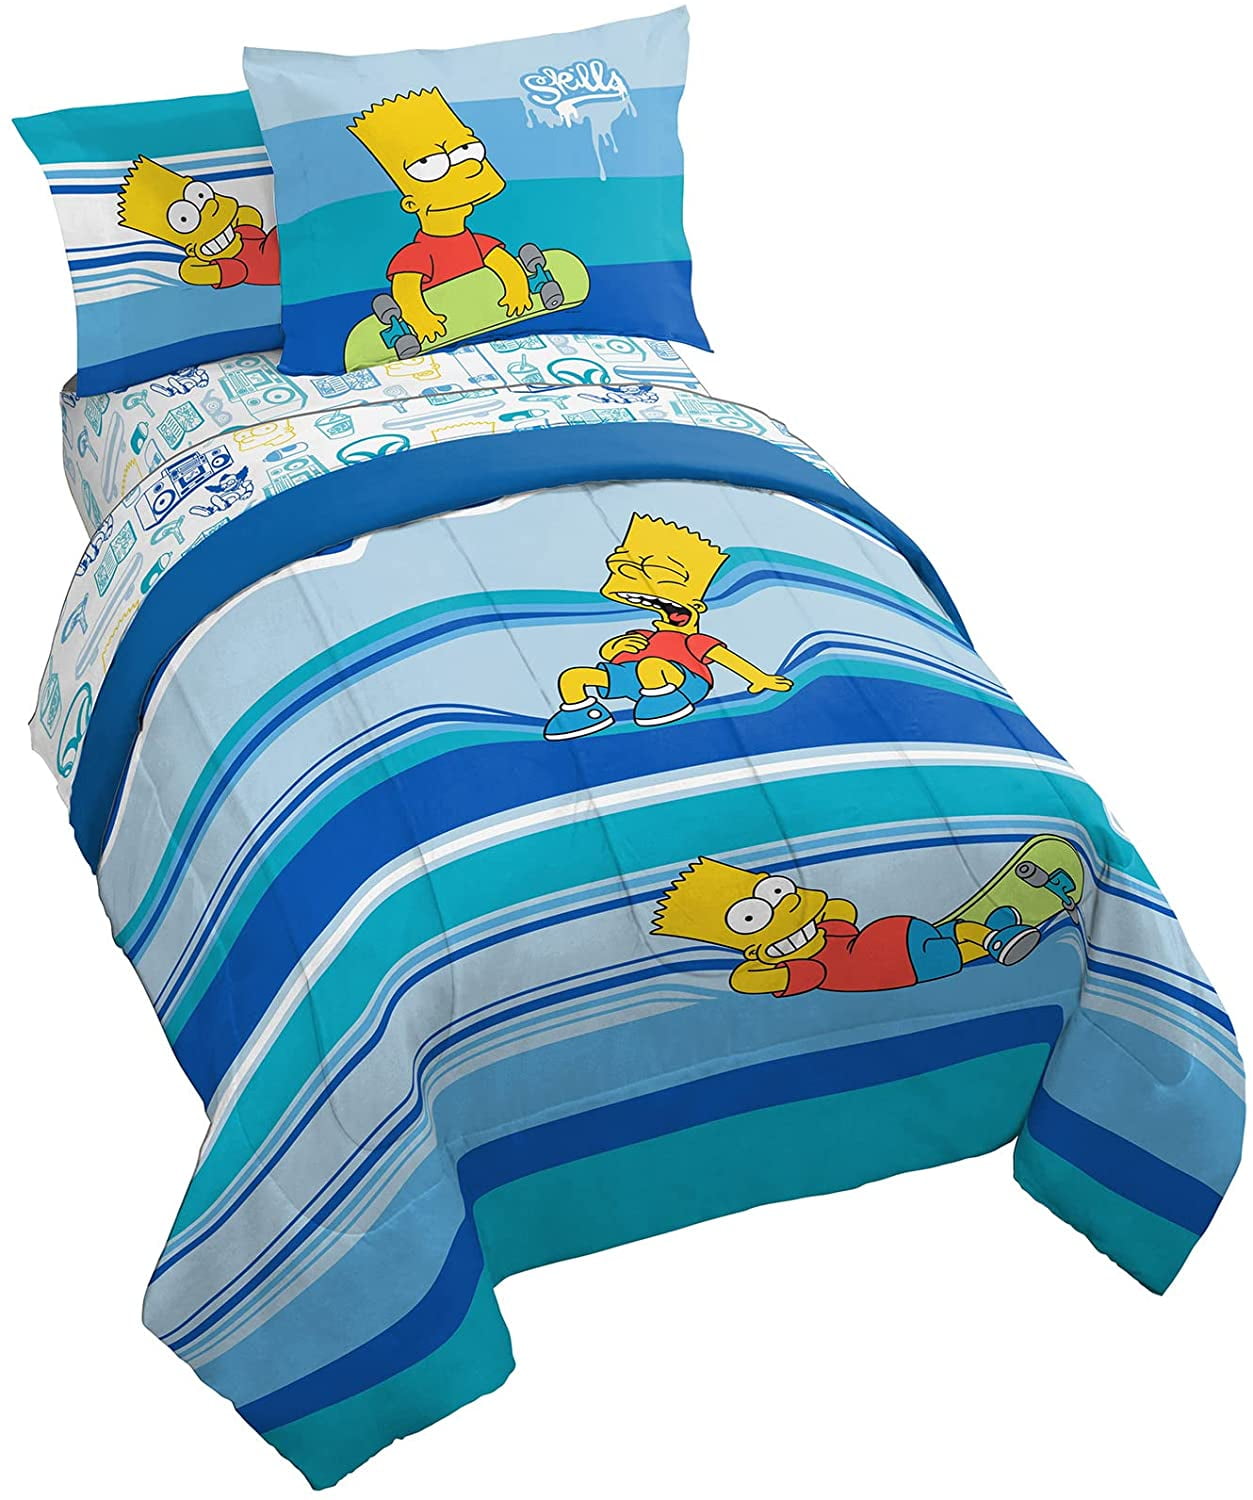 Simpsons Single Fitted Sheet Kids Cotton Bedding 